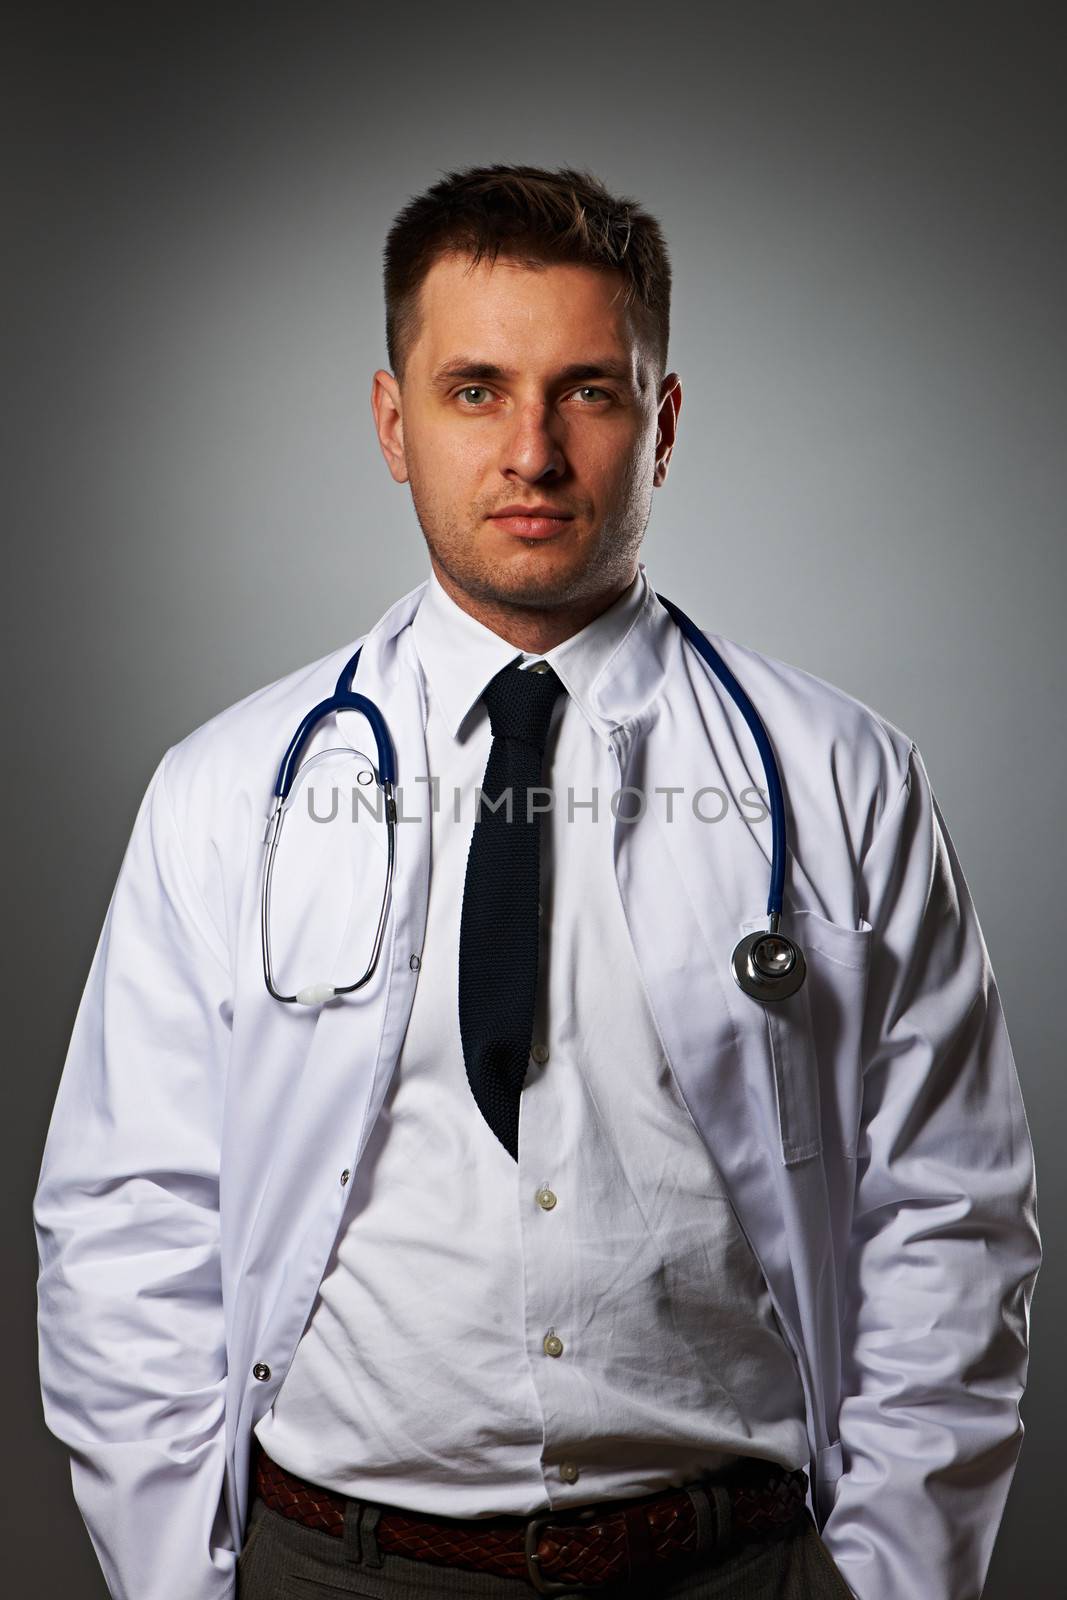 Medical doctor with stethoscope portrait against grey background 